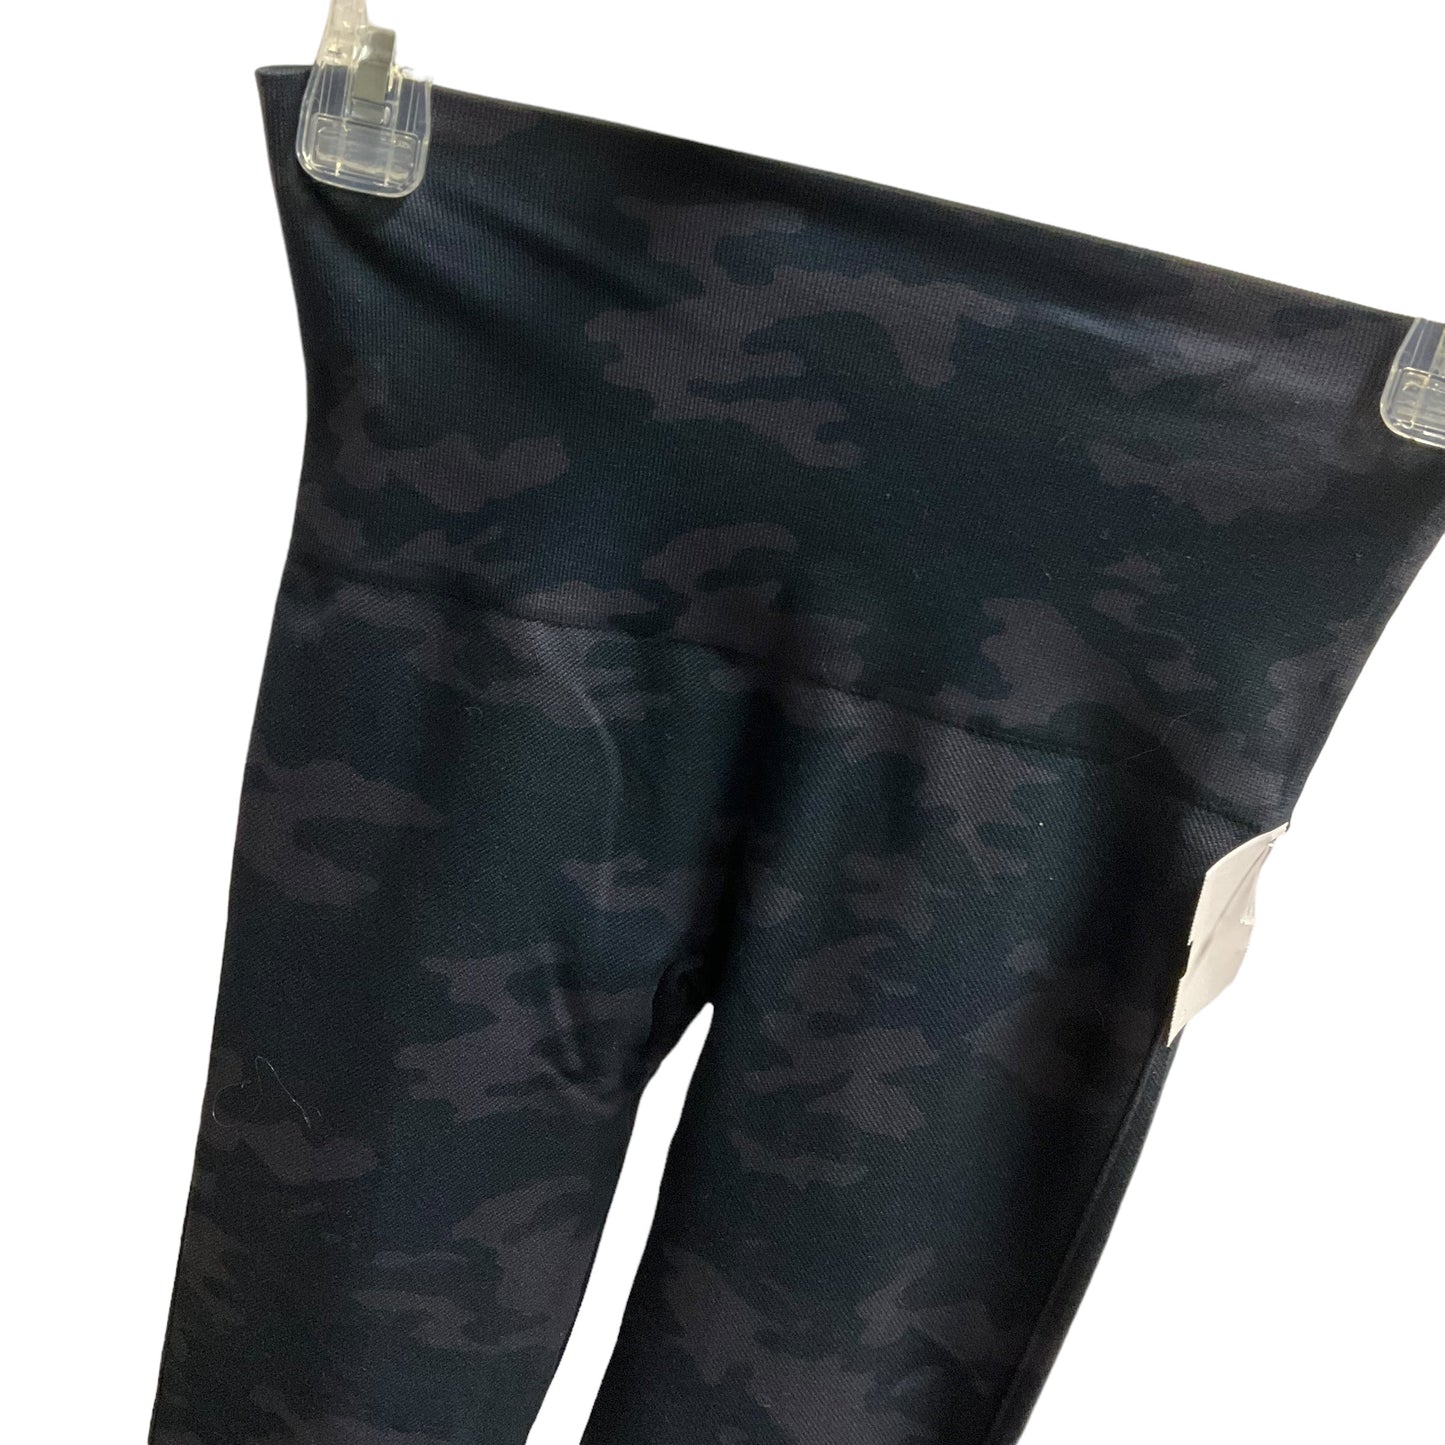 Camouflage Print Athletic Leggings Spanx, Size S